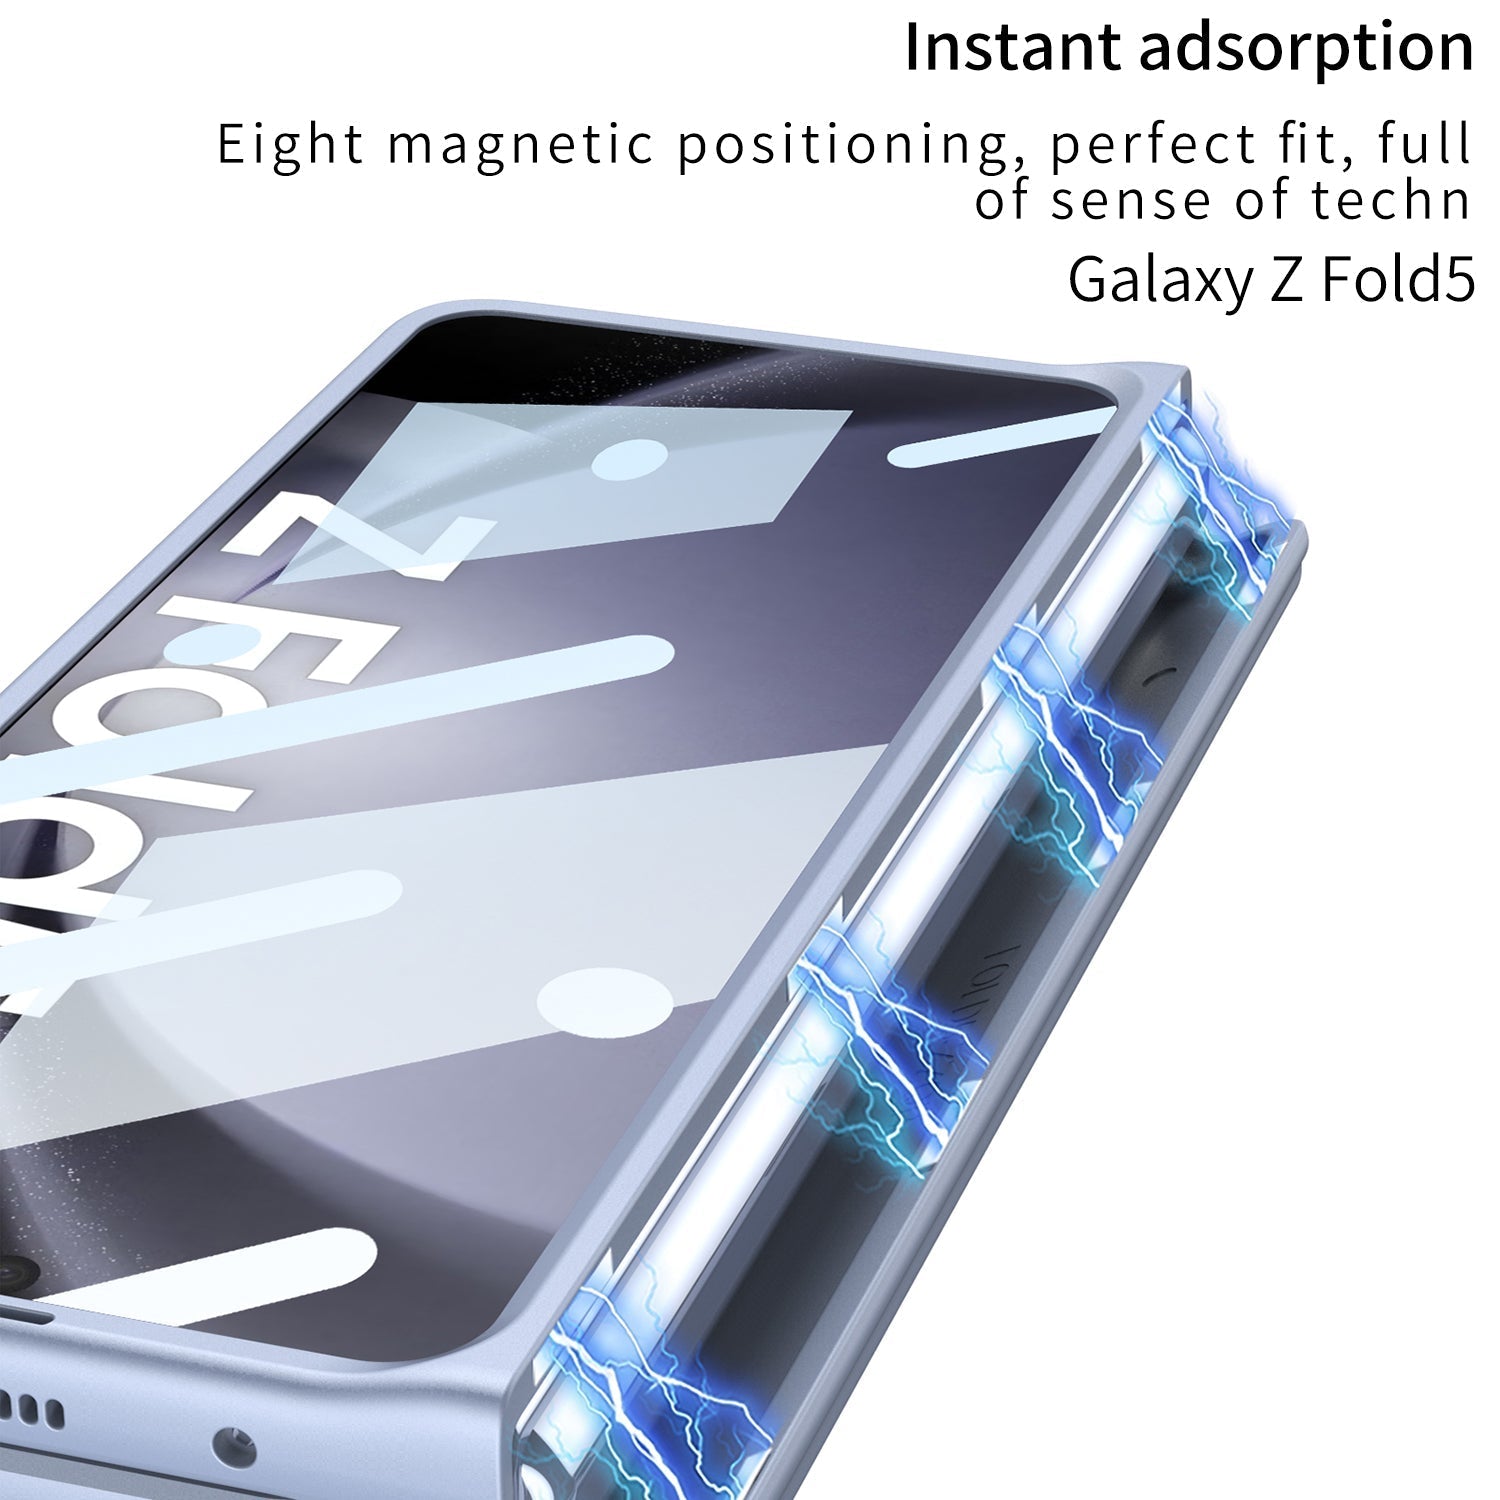 Magnetic Hinge Anti-Fall Phone Case with Pen Tray, Shell, and Film for Samsung Galaxy Z Fold 5 - Brandy Trendy Hub